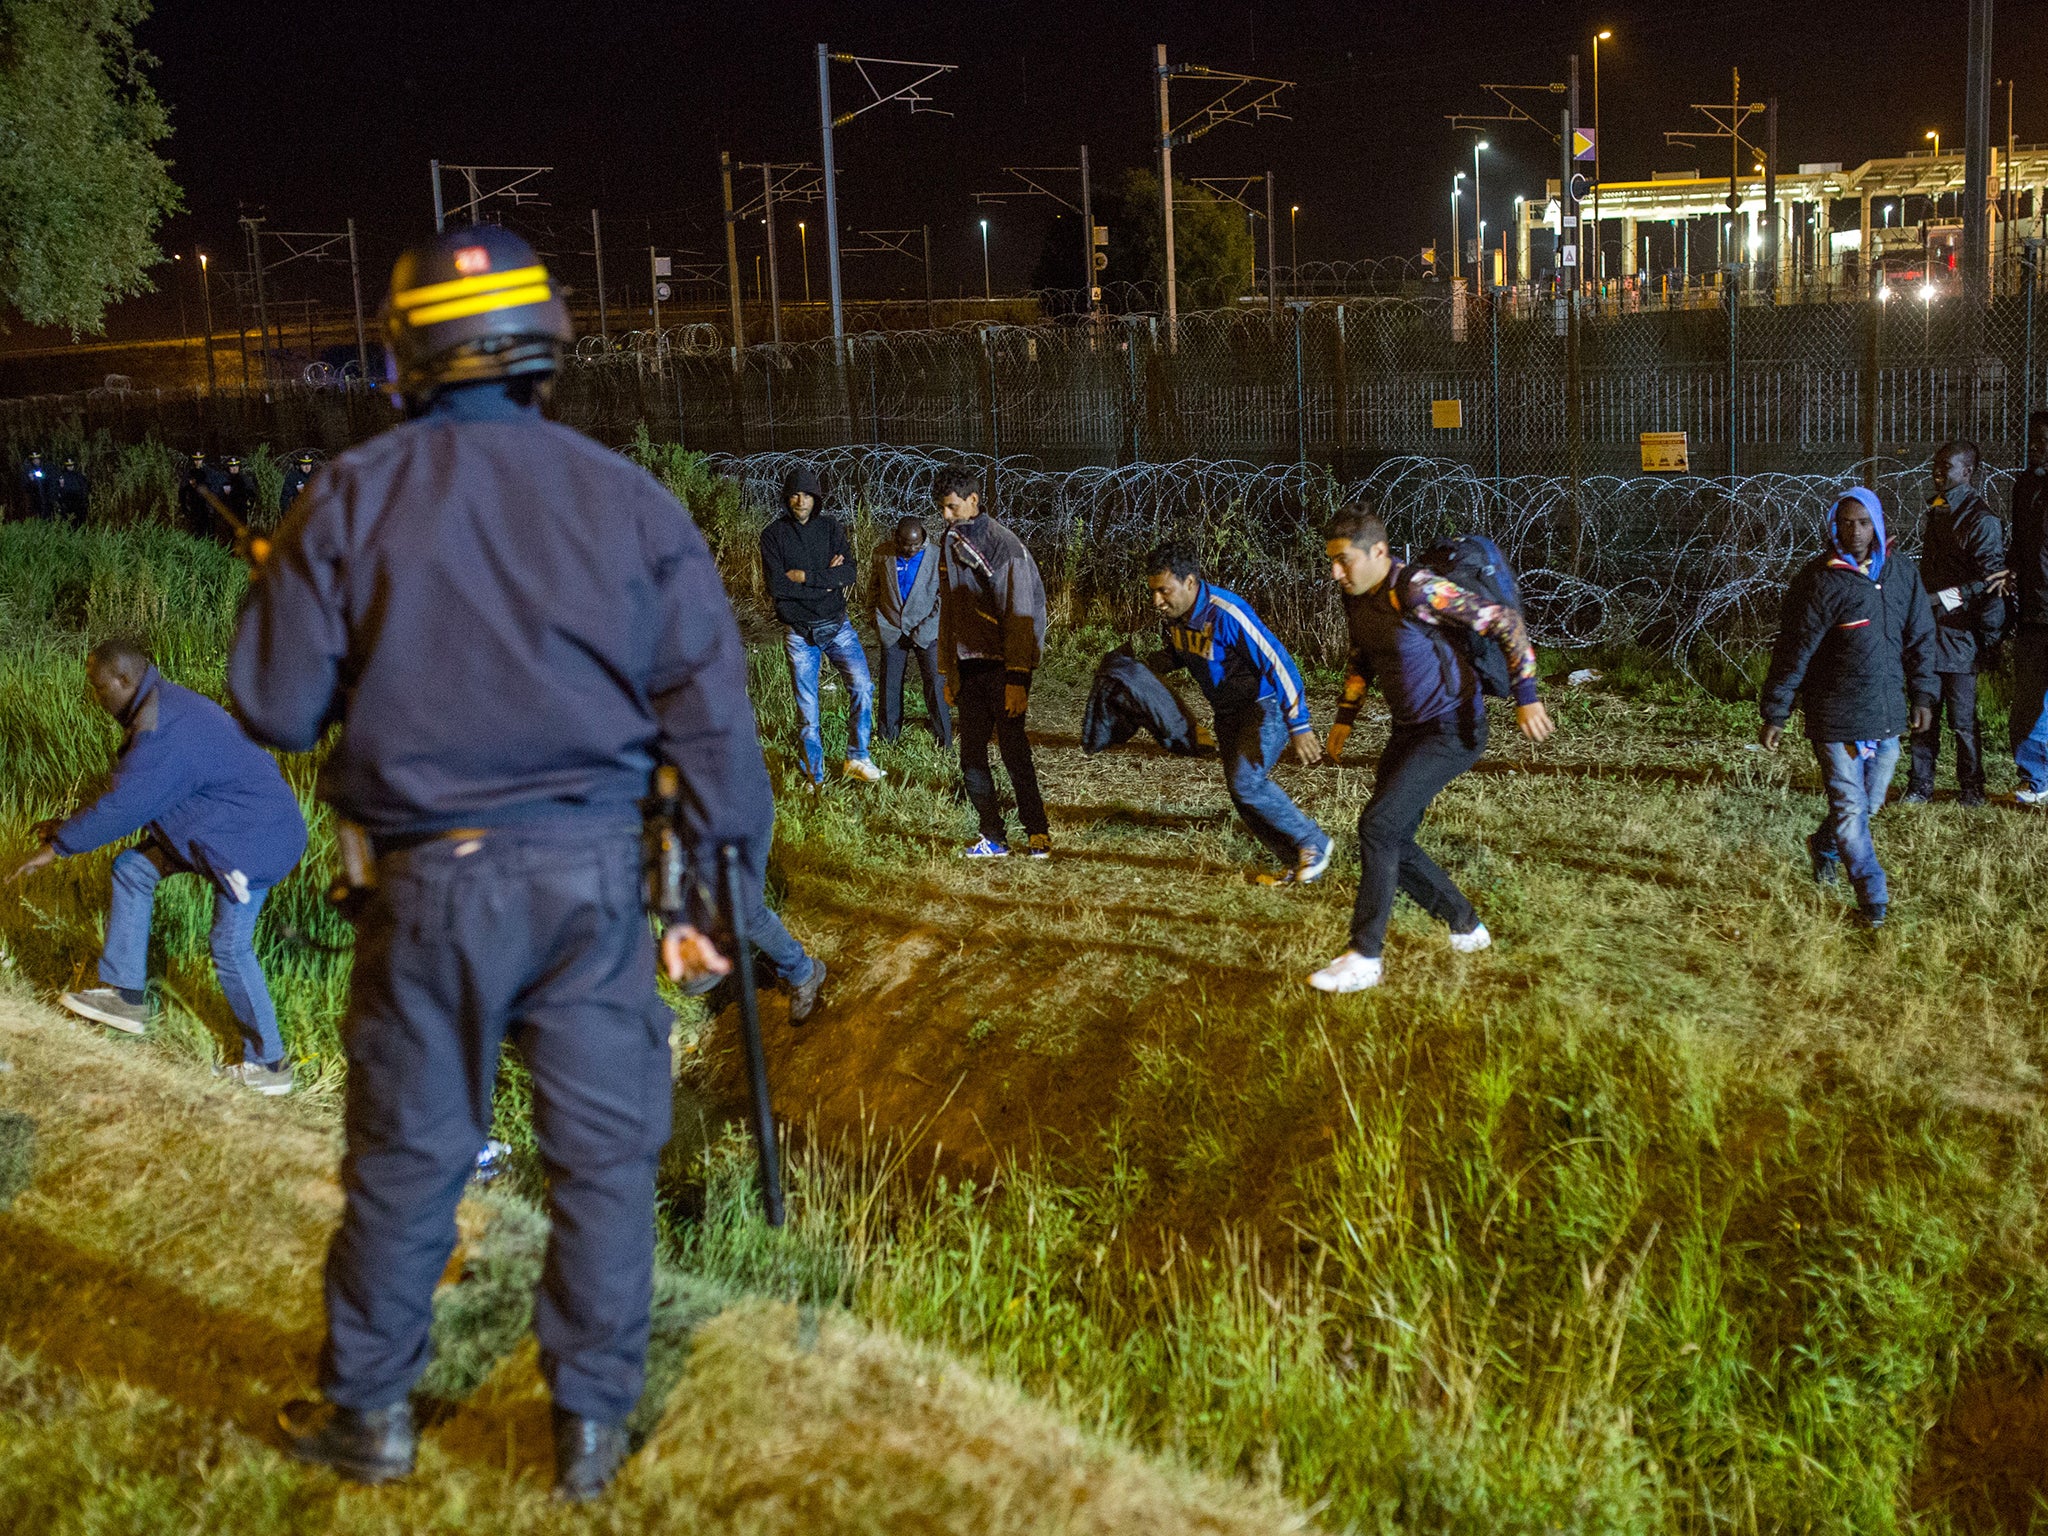 A policeman watches men move away from a security fence beside train tracks near the Eurotunnel terminal in Coquelles